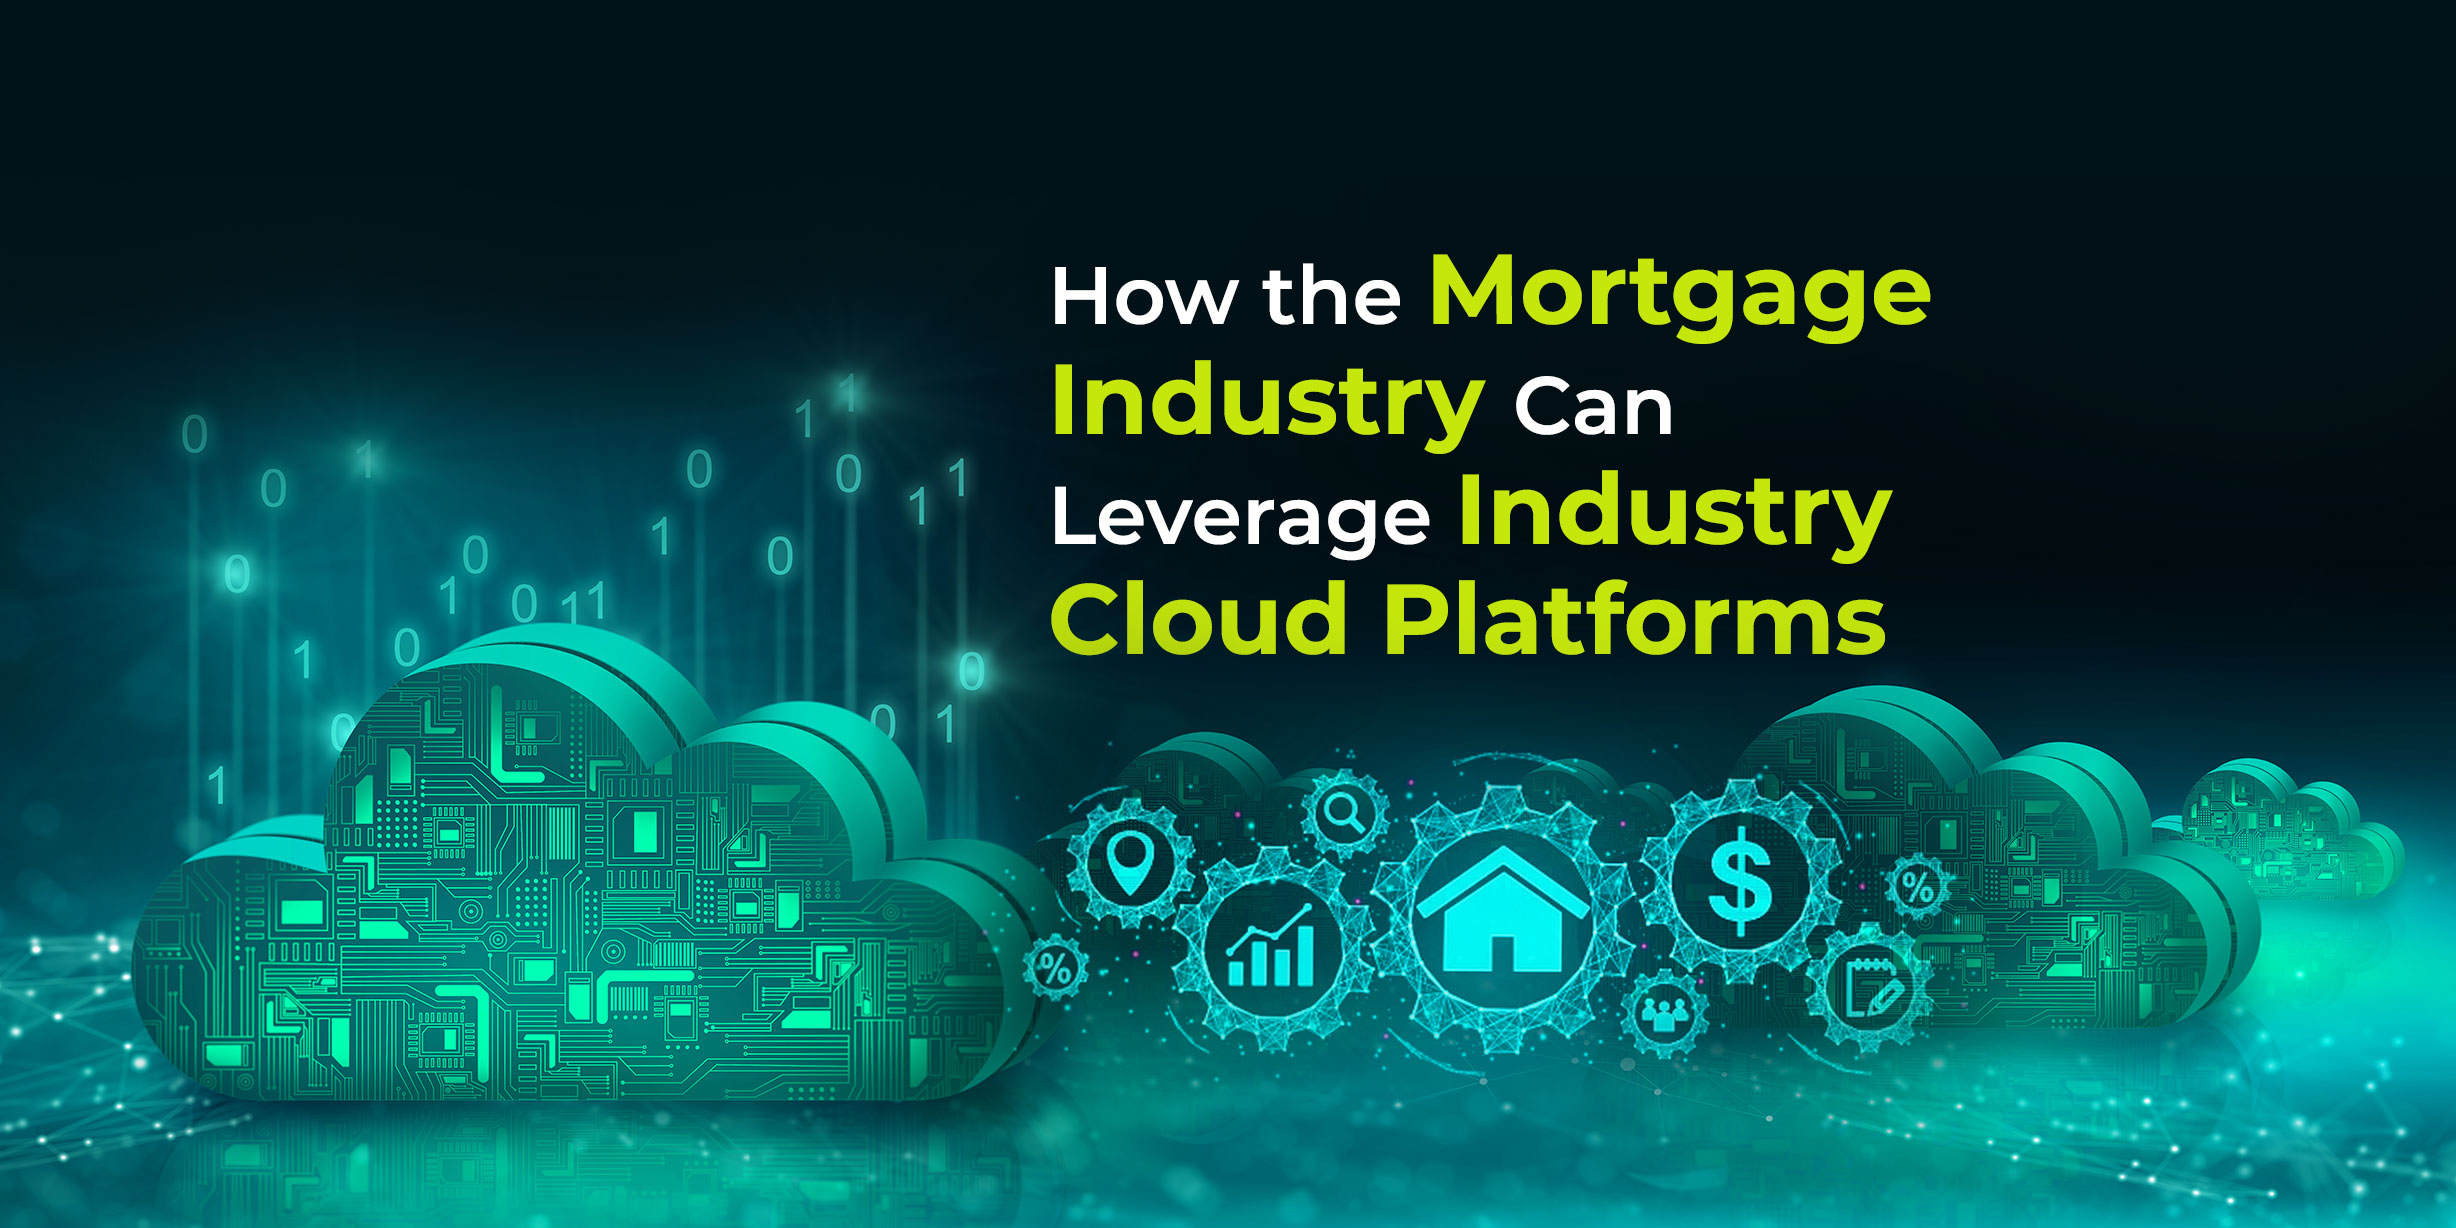 How the Mortgage Industry Can Leverage Industry Cloud Platforms